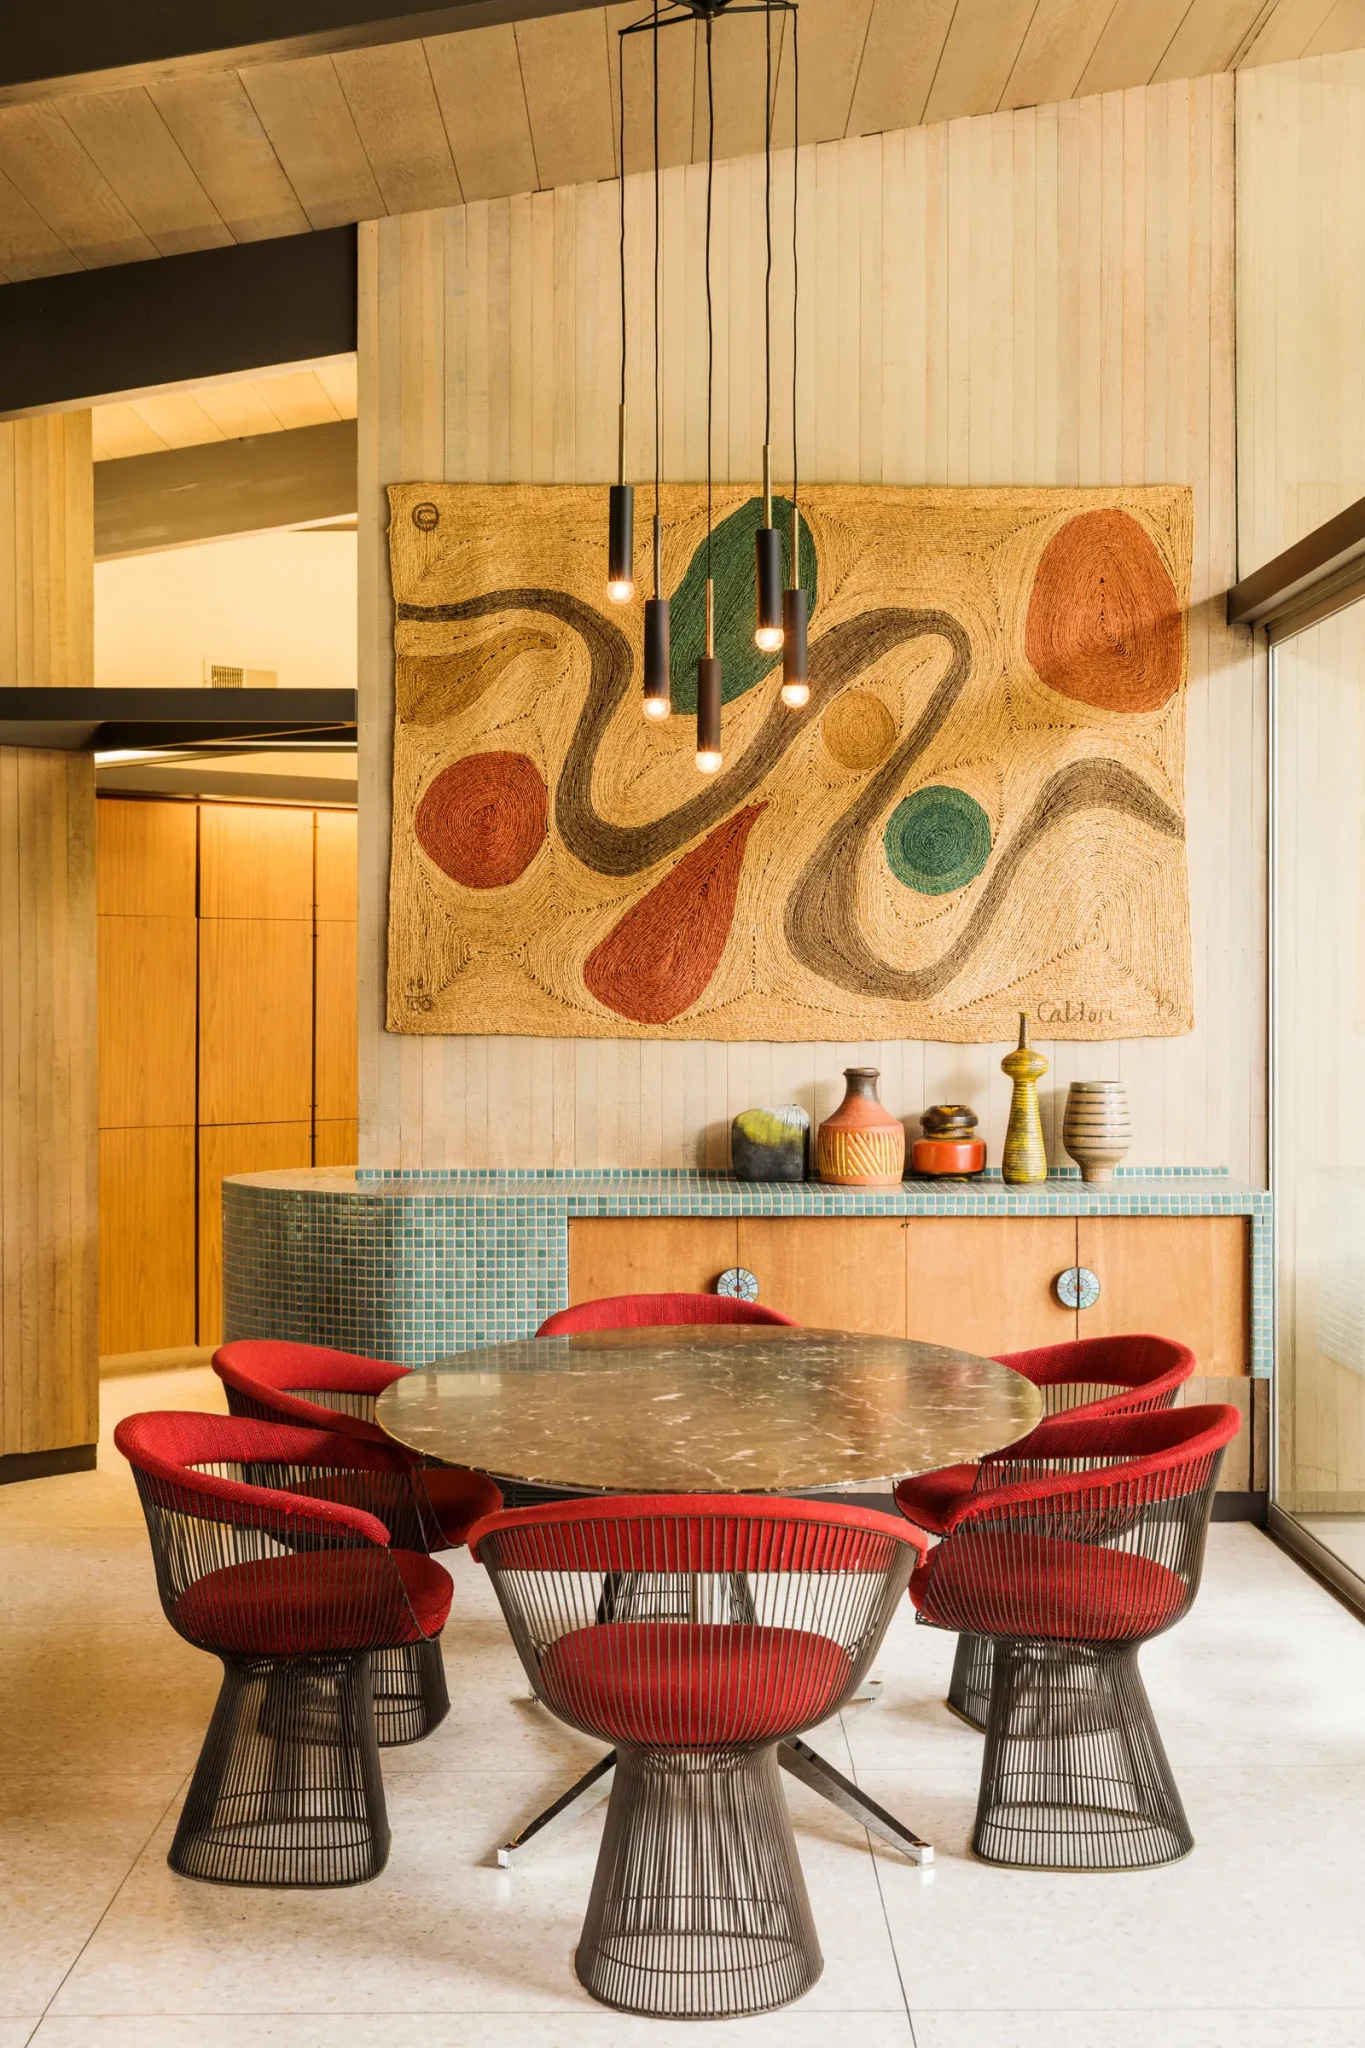 A mid-century modern home's dining room